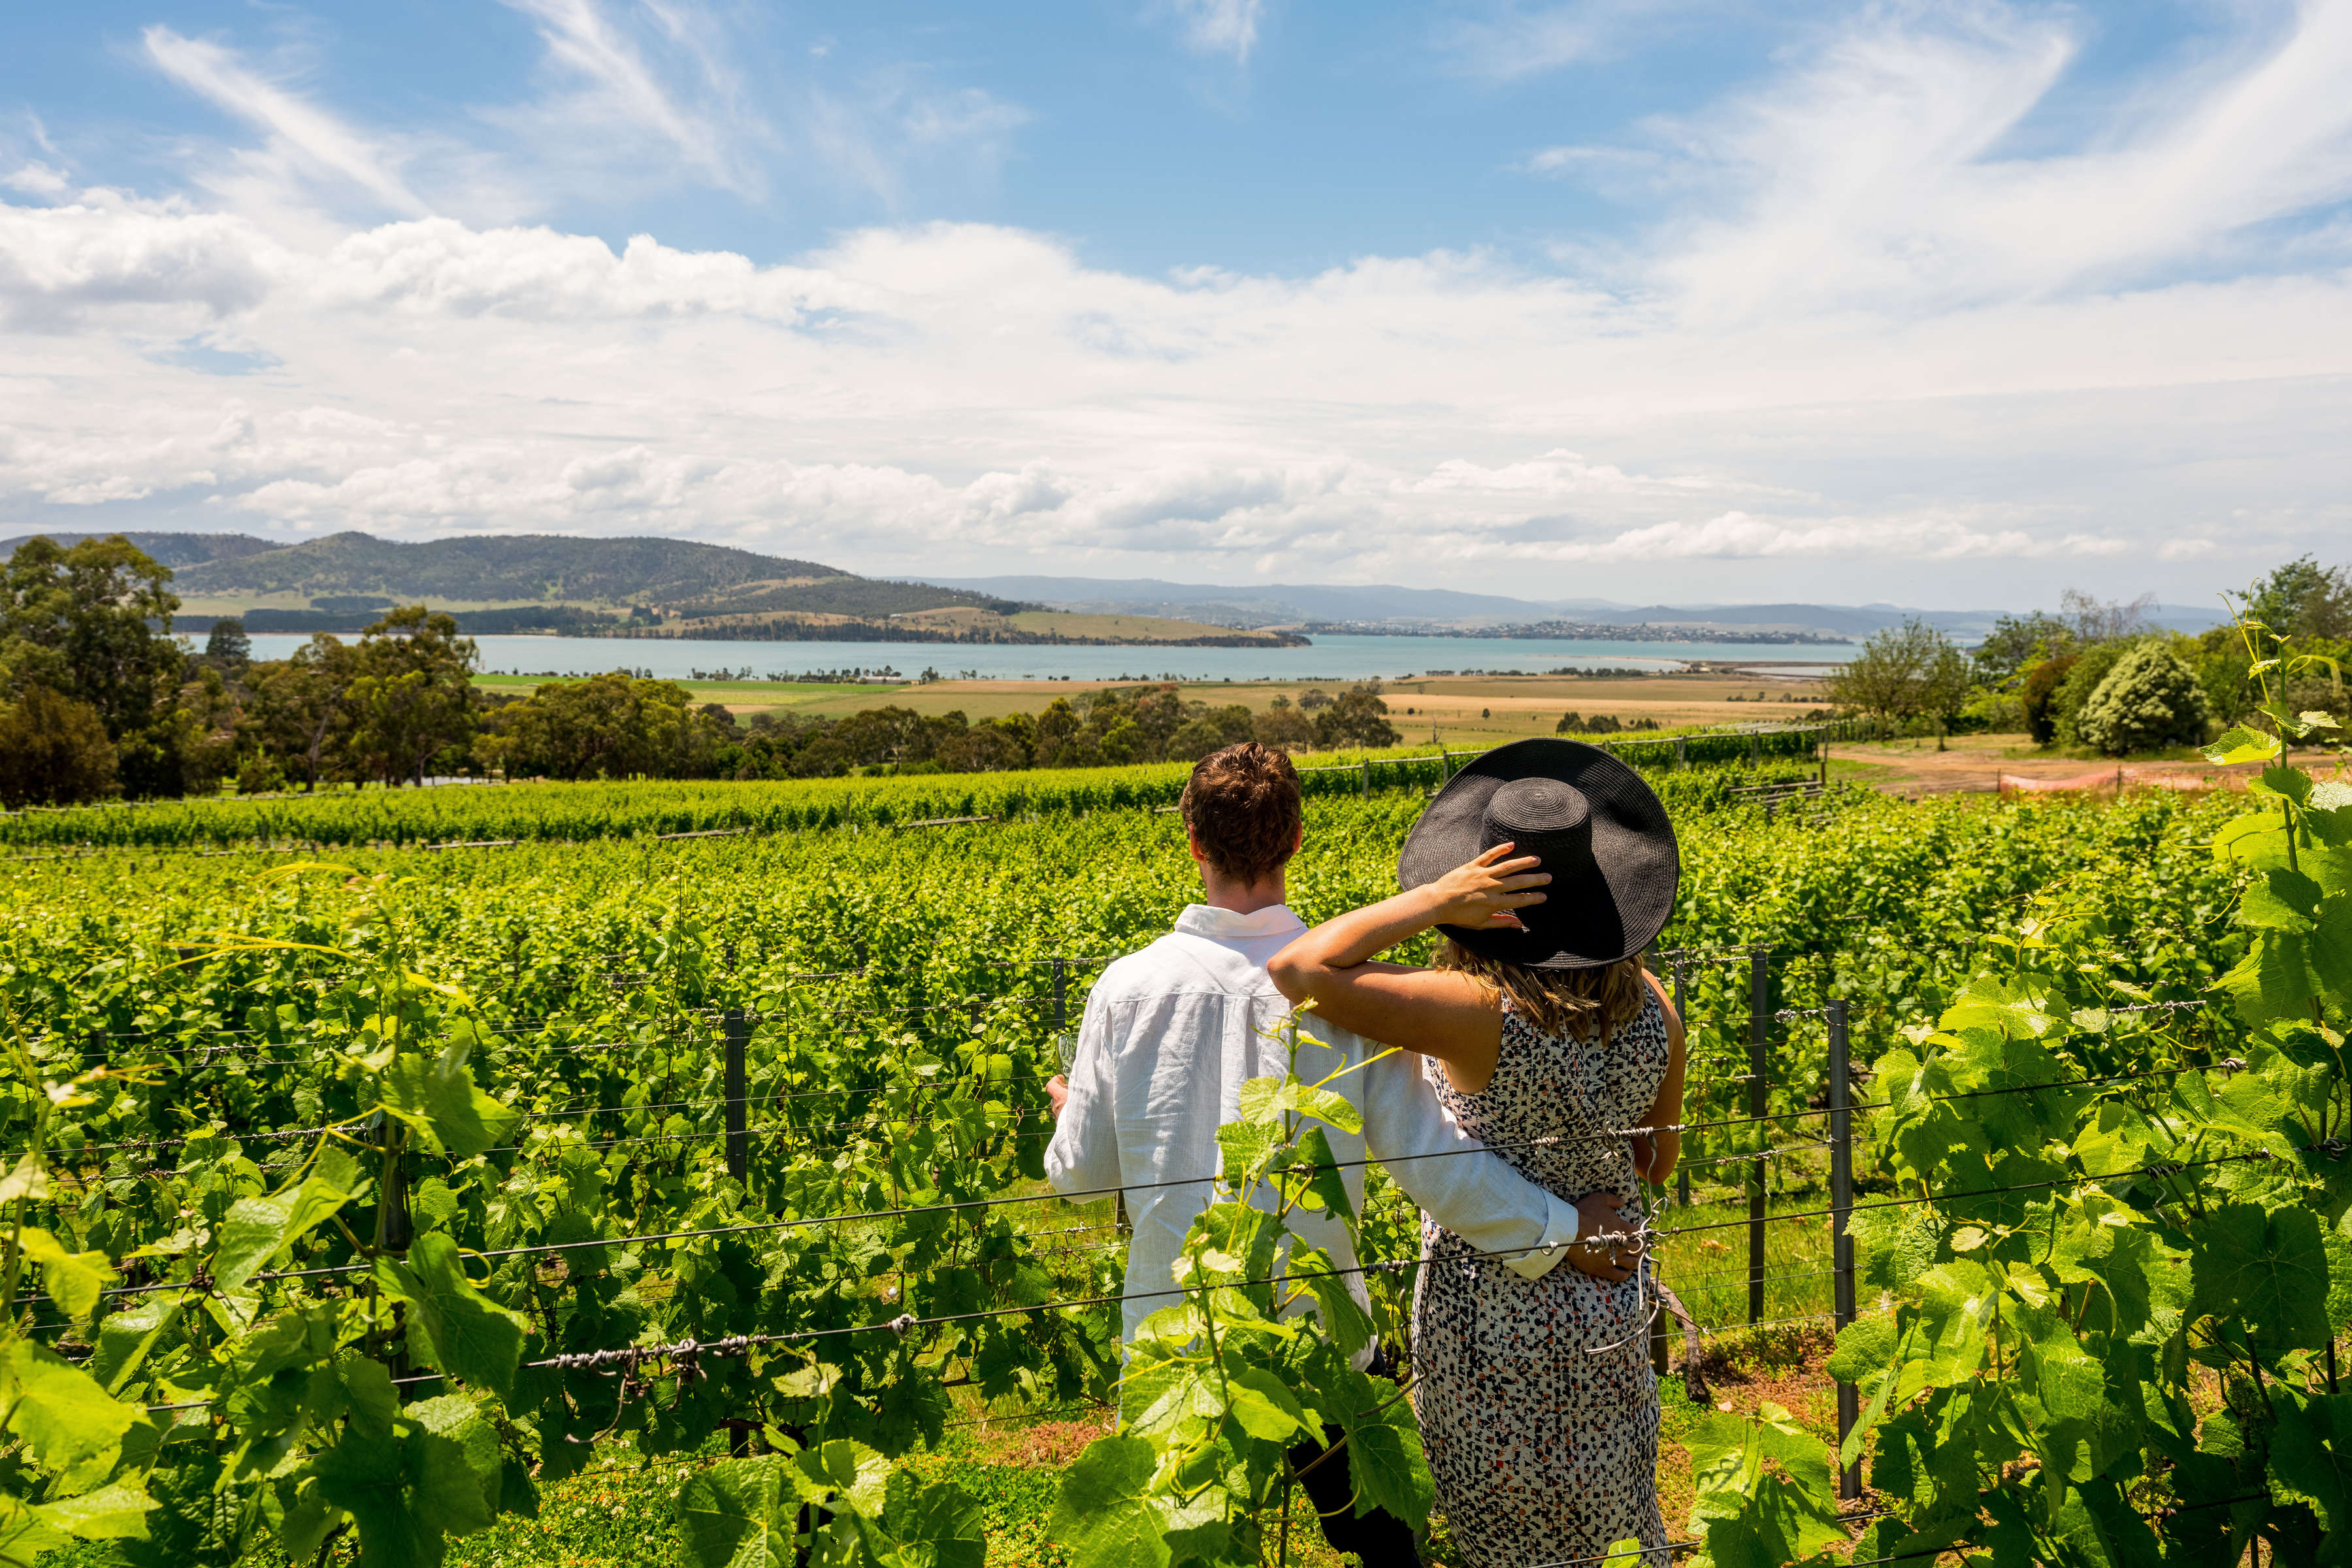 A man and a woman standing between rows of vines overlooking Barilla Bay on a sunny day.